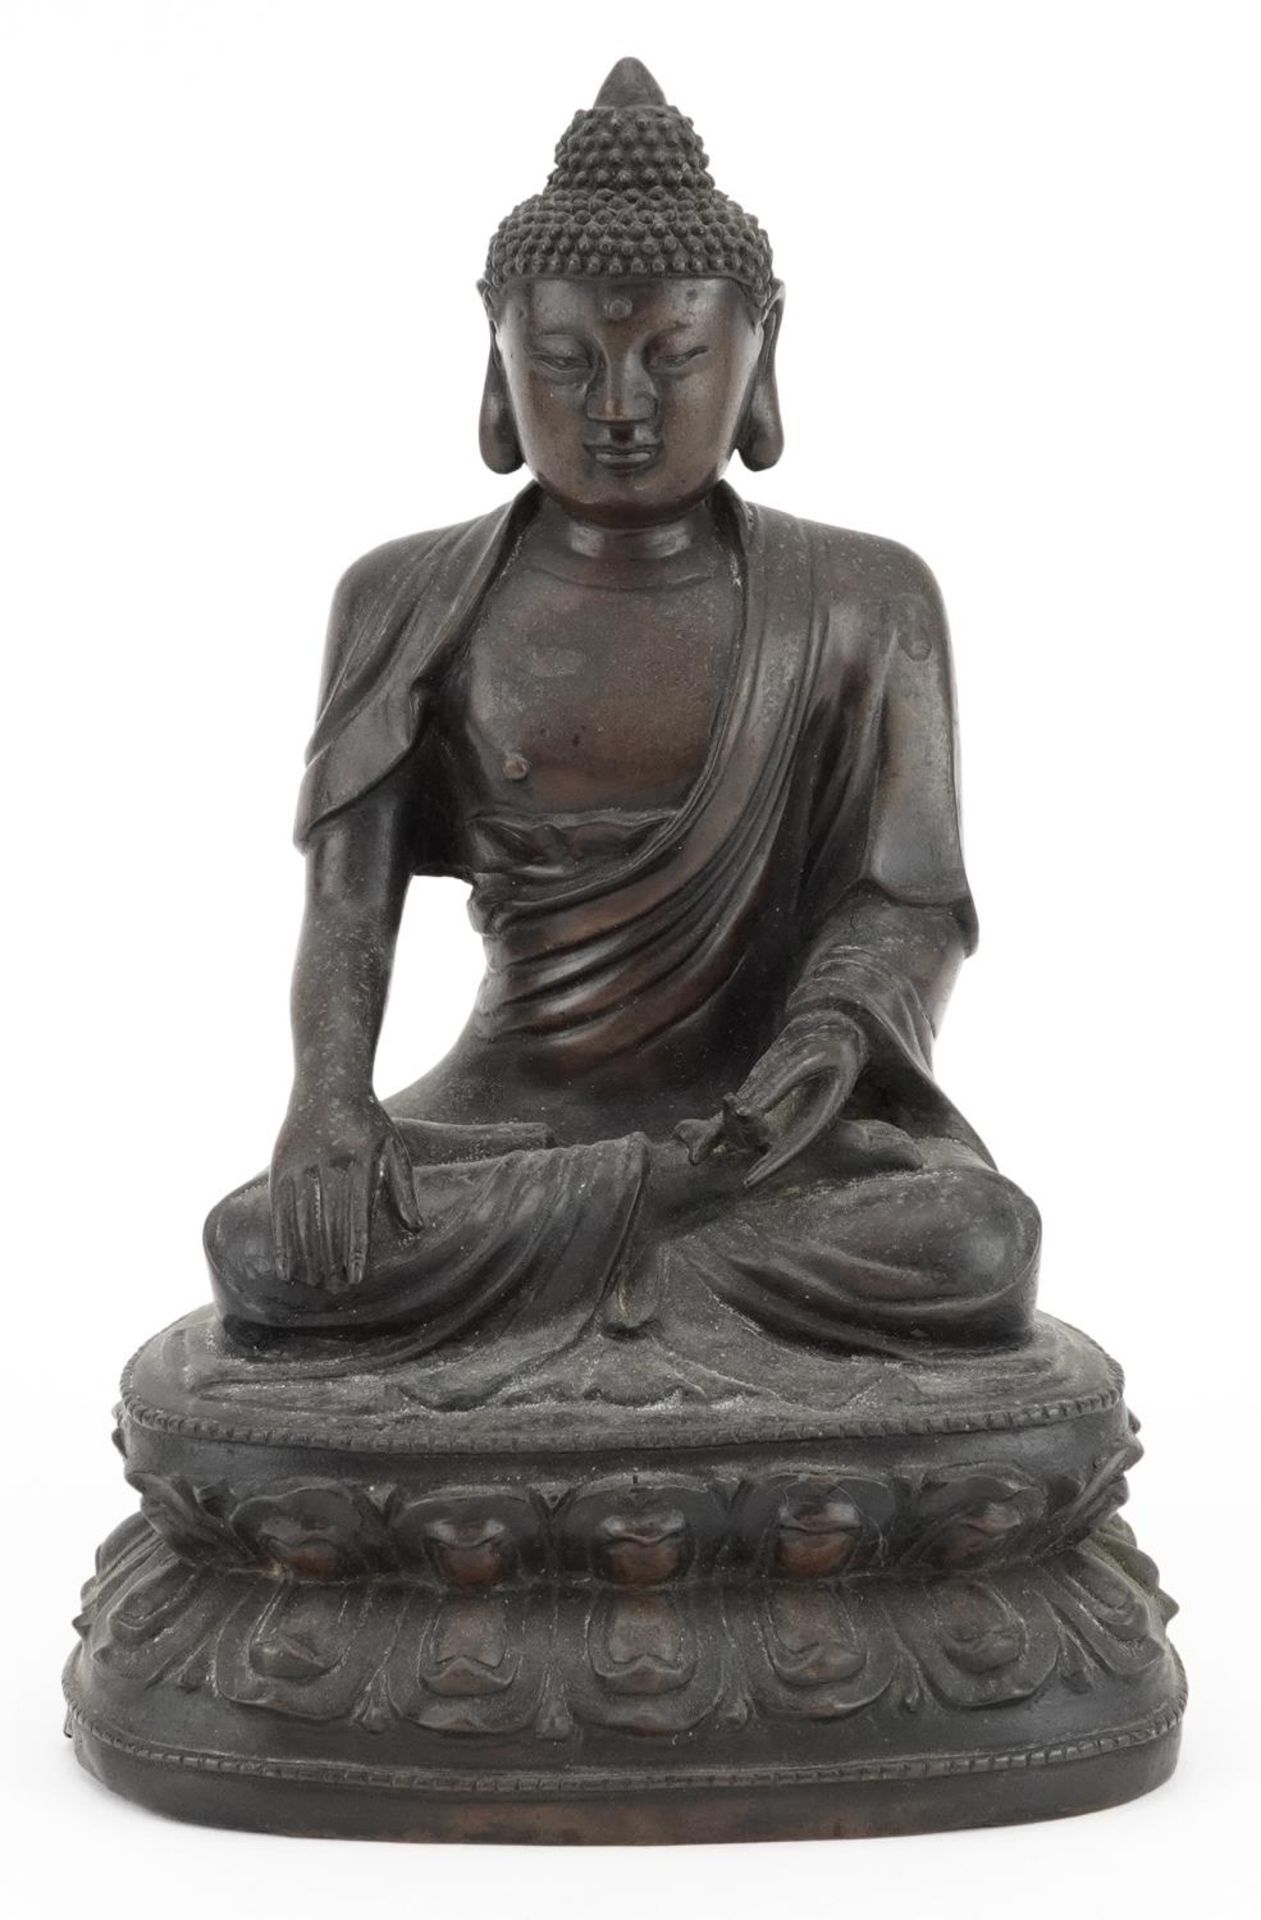 18th century Chinese bronze Buddha, 25cm high : For further information on this lot please visit